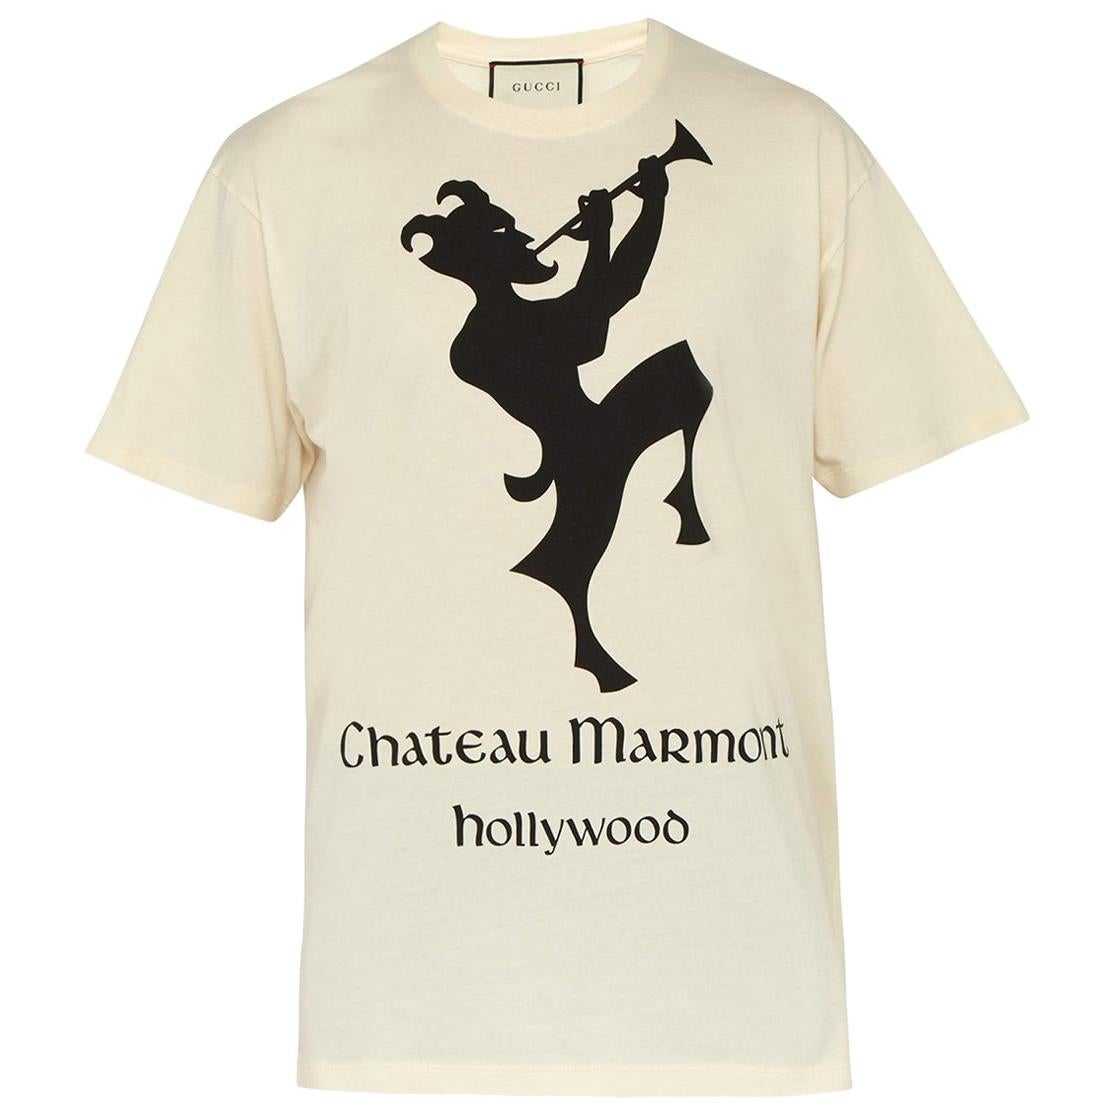 Gucci Runway Chateau Marmont T-shirt - New Season US 4 For Sale at 